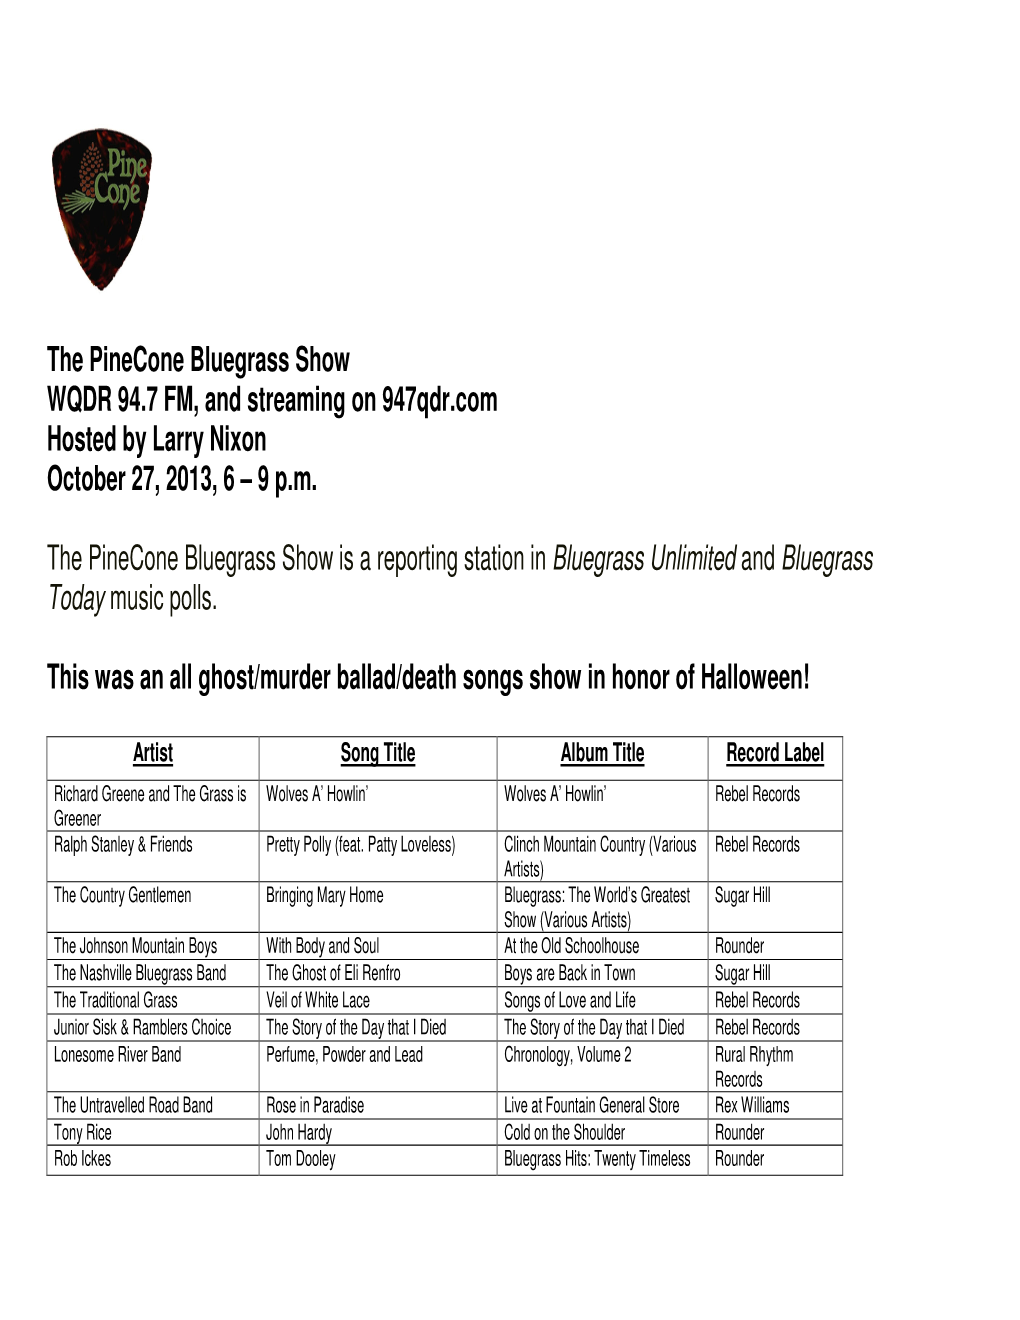 The Pinecone Bluegrass Show WQDR 94.7 FM, and Streaming on 947Qdr.Com Hosted by Larry Nixon October 27, 2013, 6 – 9 P.M